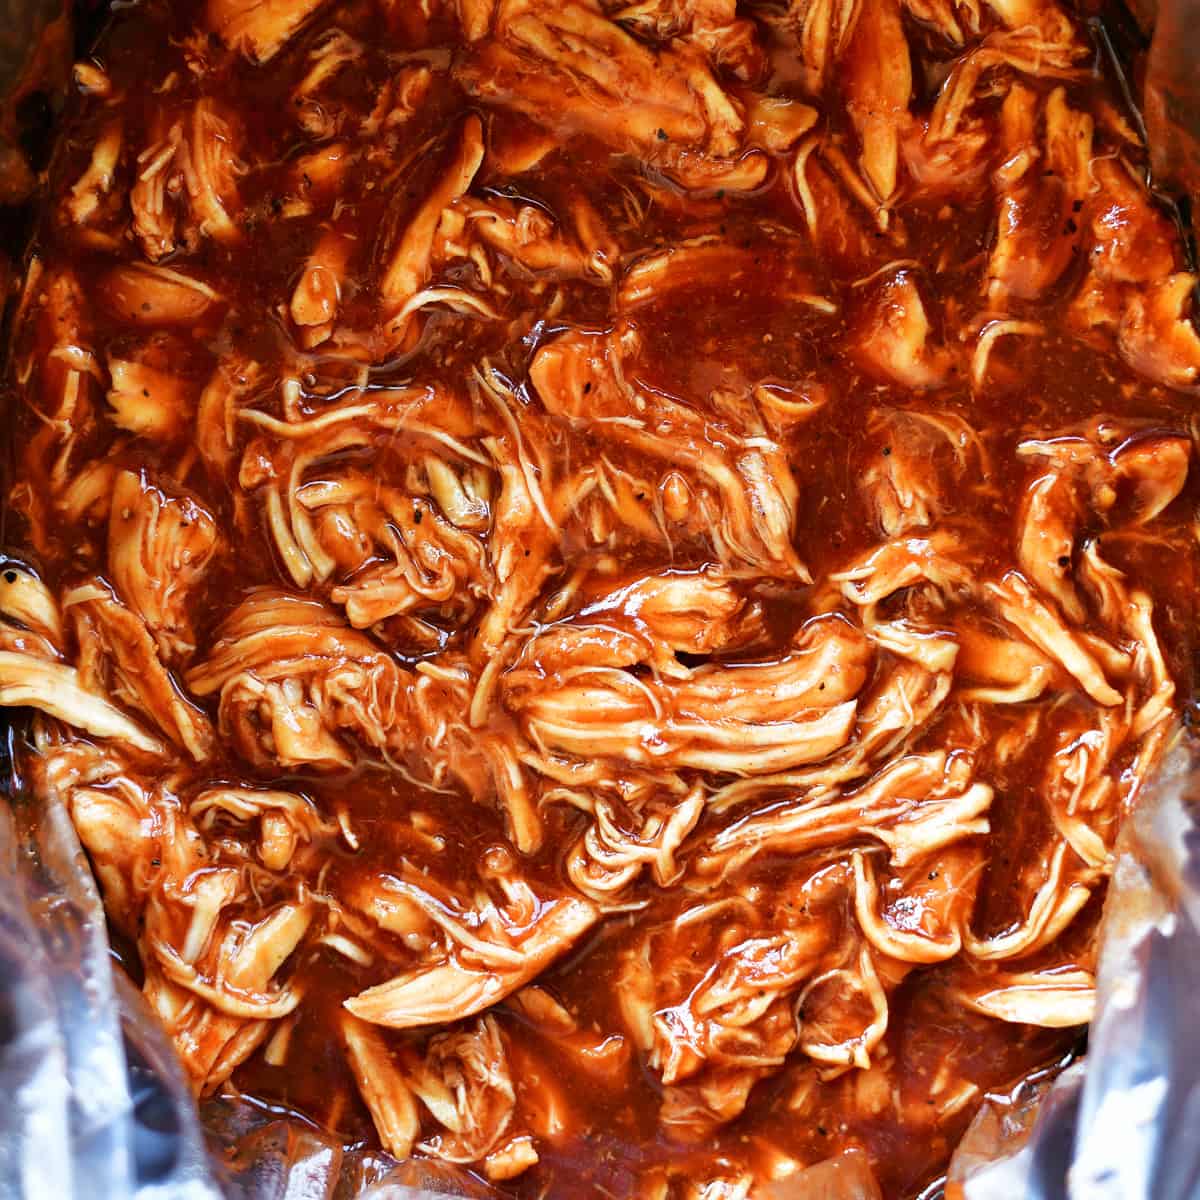 bbq chicken in a slow cooker.